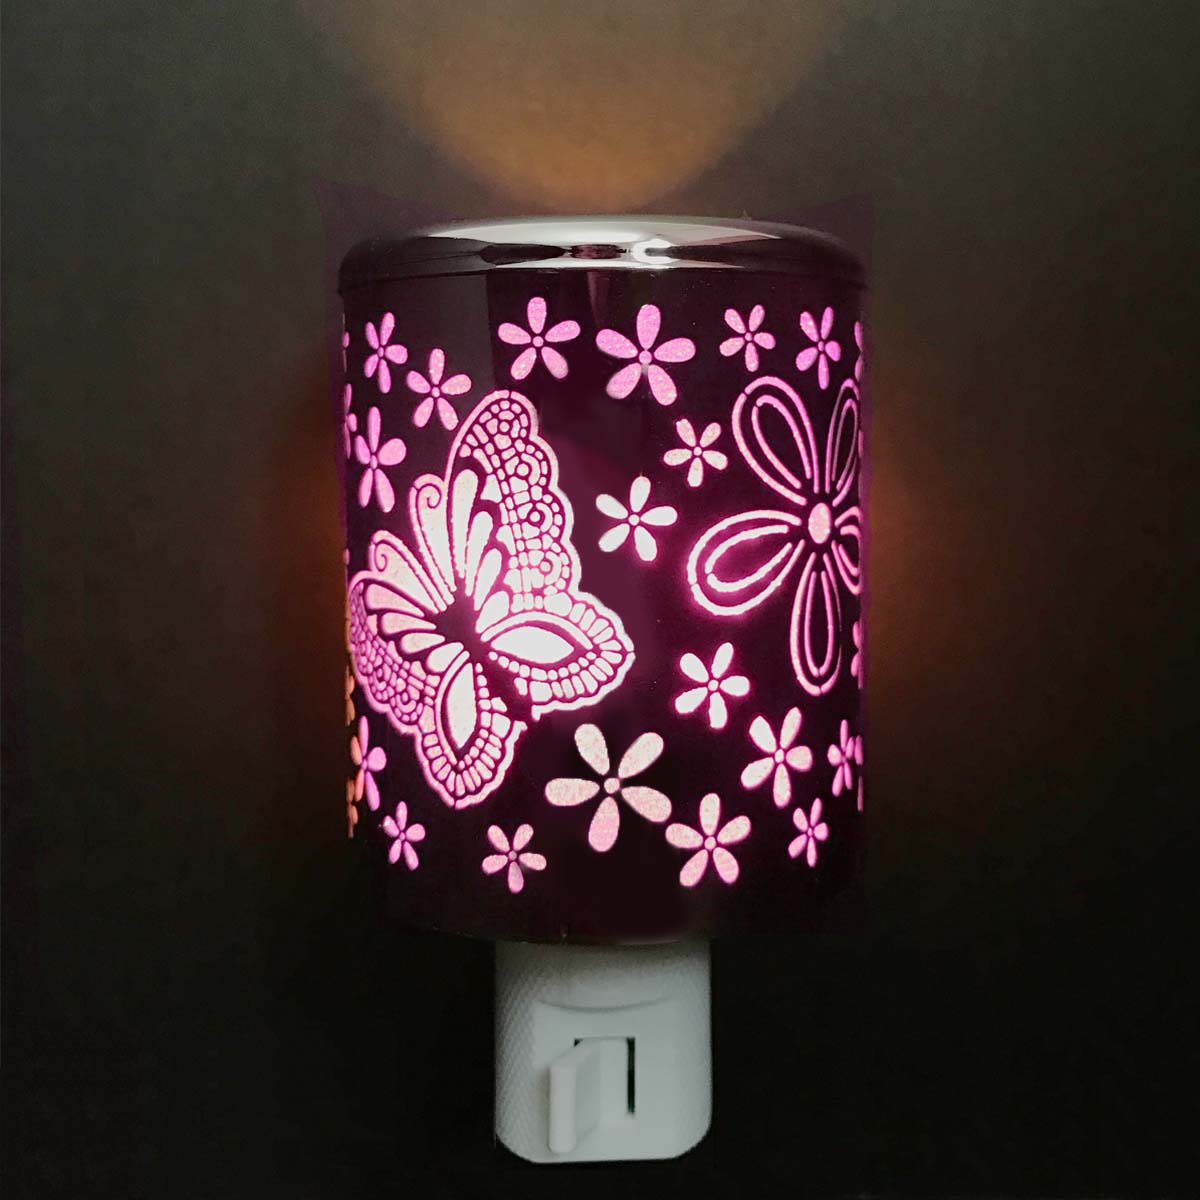 Nl 1076 Aluminum Crafted Led Night Light - Butterfly